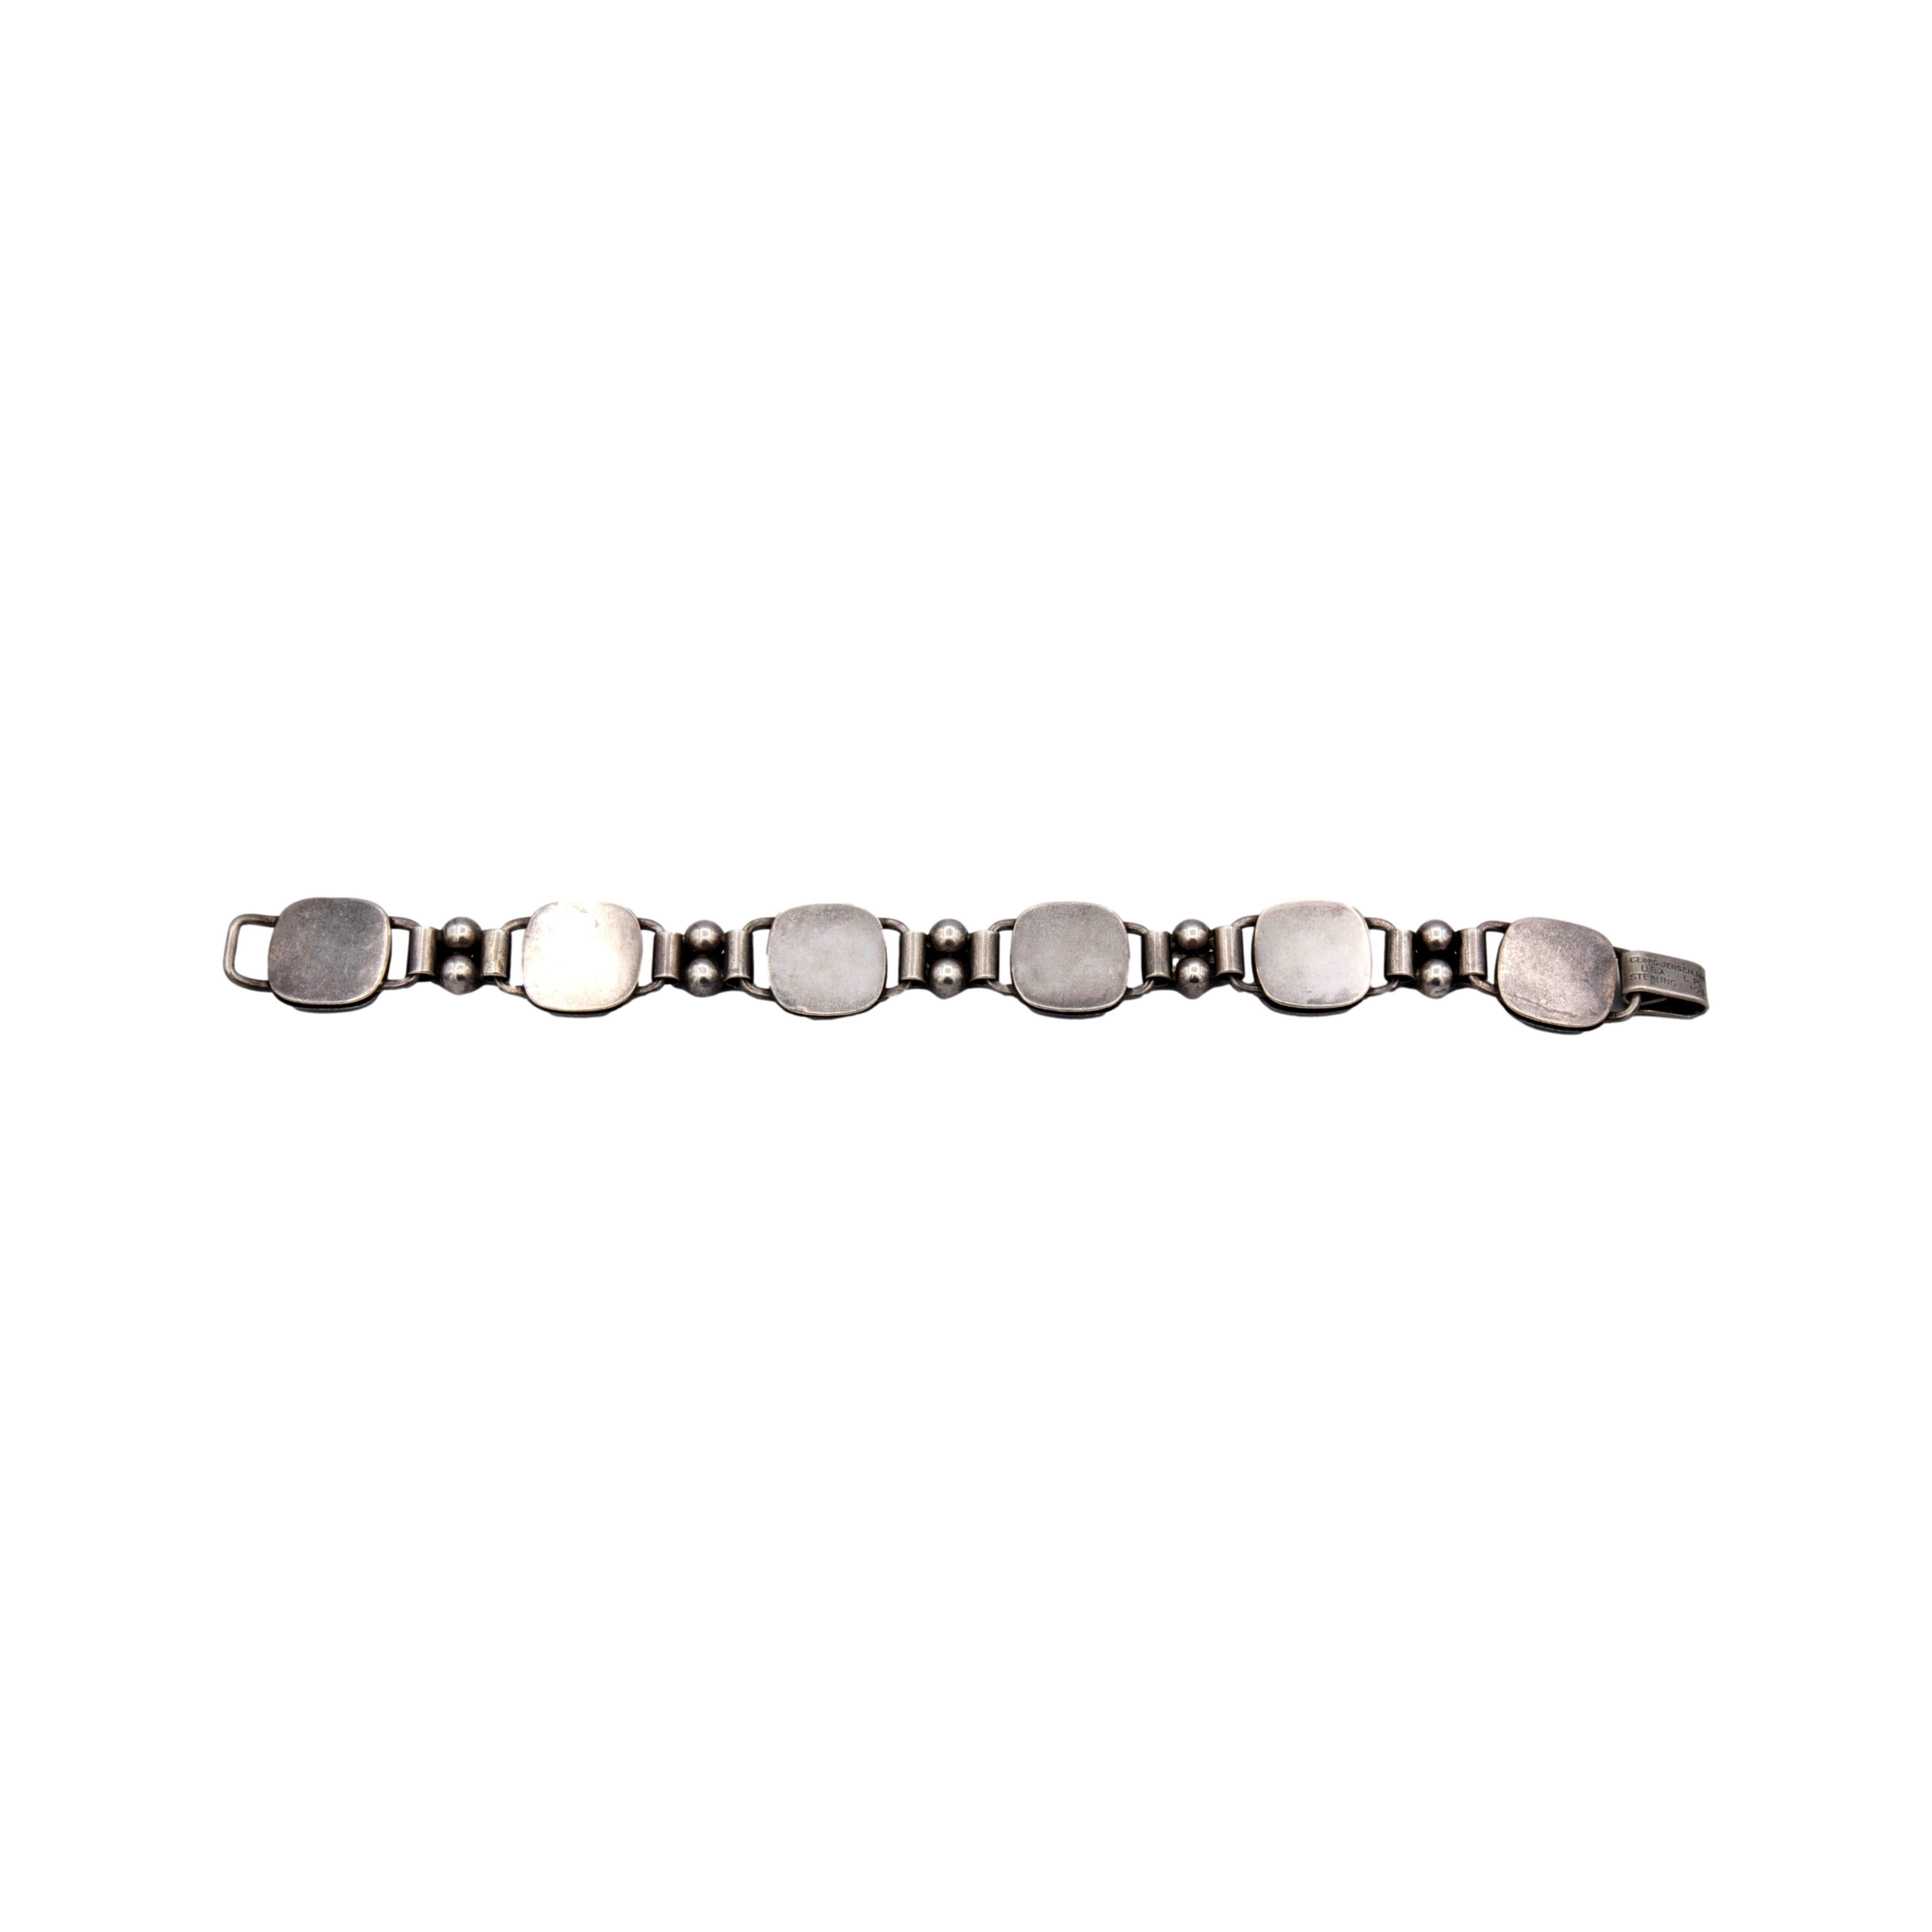 Vintage GEORG JENSEN Sterling Silver Floral Bracelet Circa 1940's In Good Condition For Sale In New York, NY